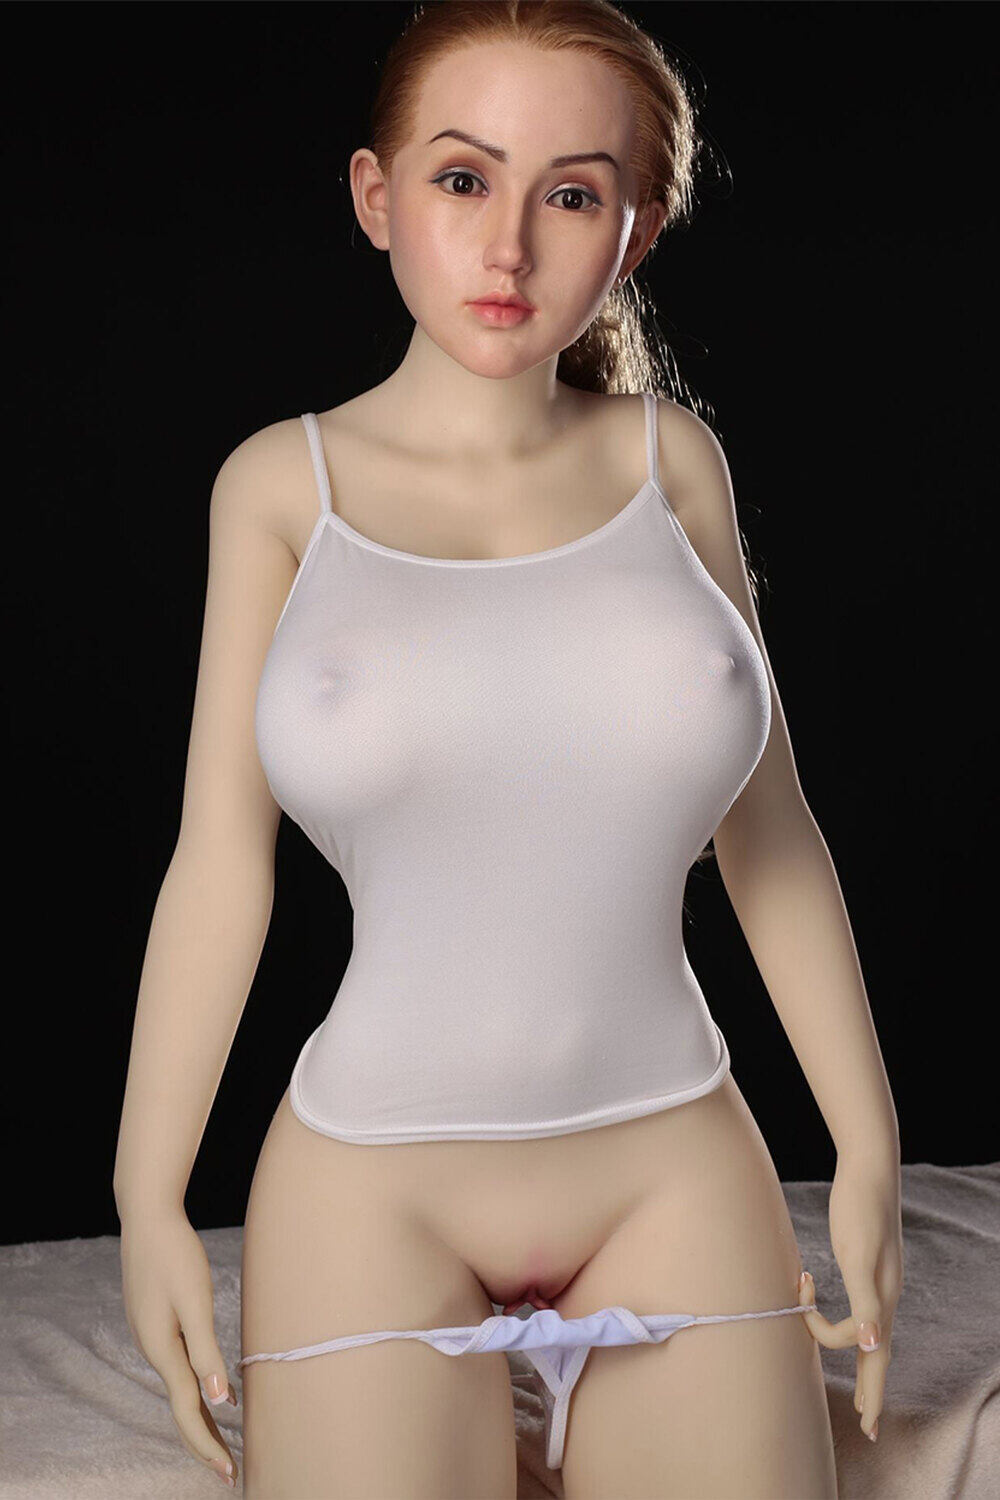 Cassi - I-Cup Sex Doll XY 161cm(5ft3) Love Dolls image8